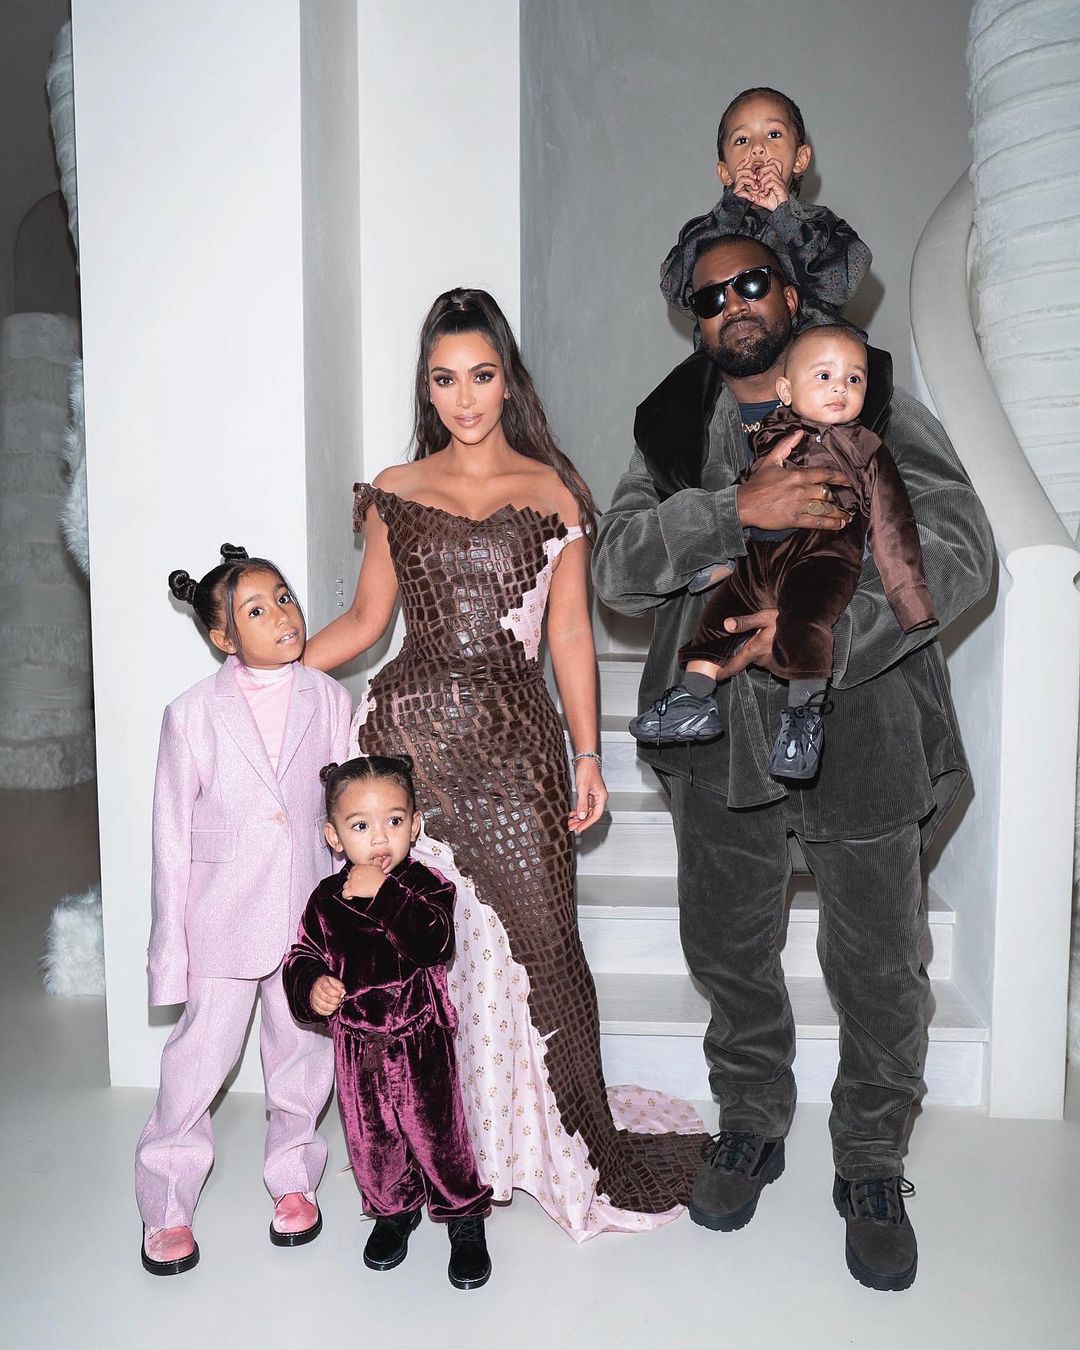 Kim shares North and her three younger children: Saint, Chicago, and Psalm, with her ex-husband, Kanye West